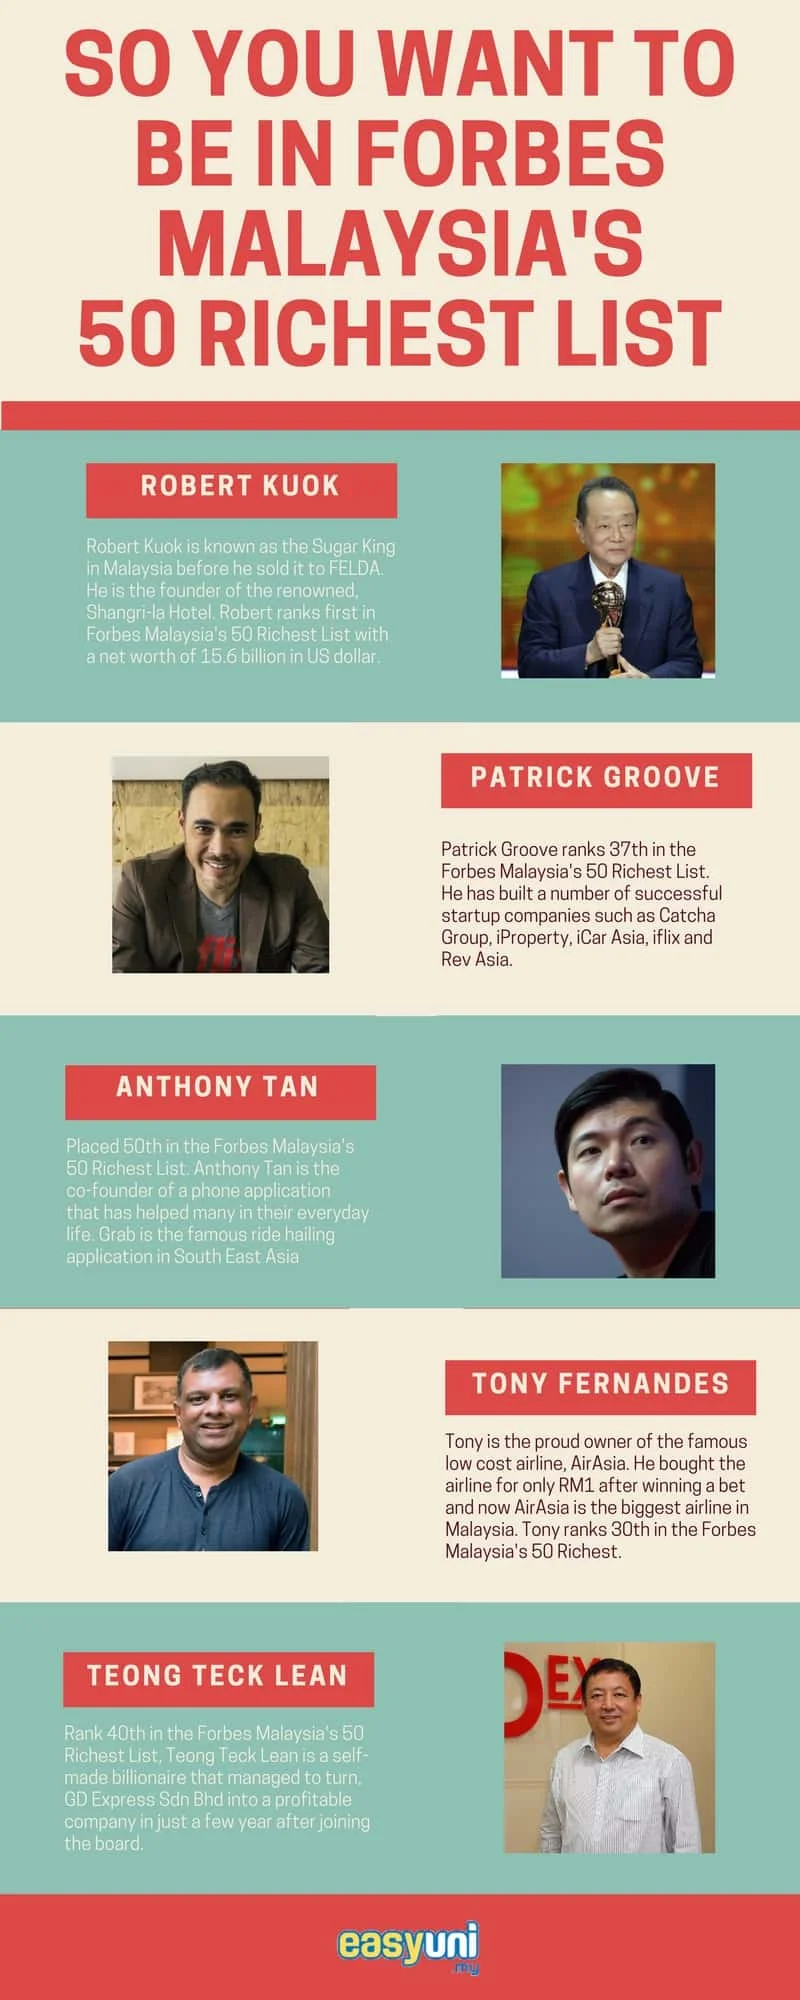 forbes malaysia's 50 richest list infographic entrepreneurs 